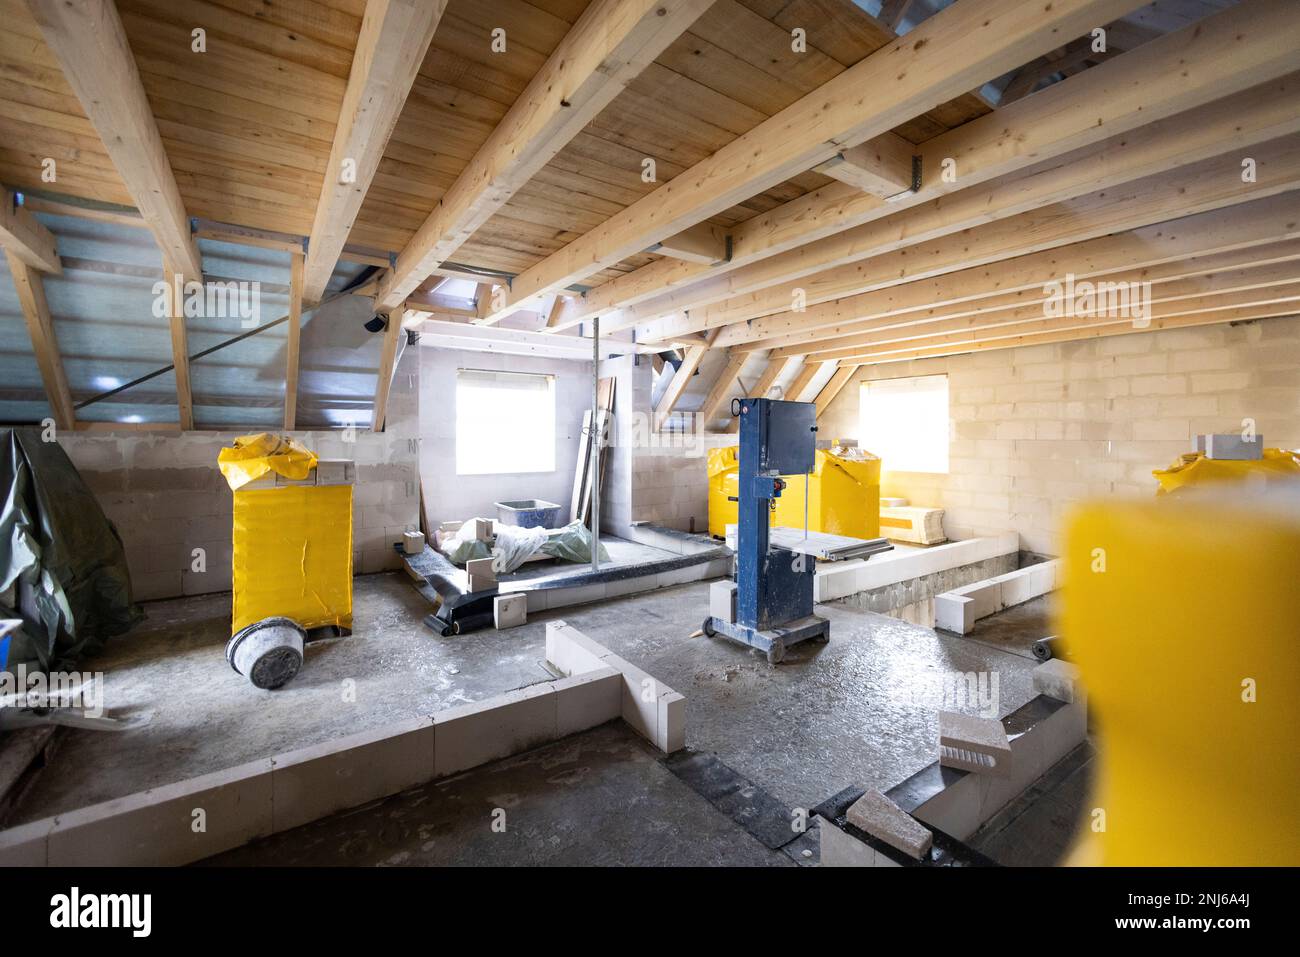 Construction site inside a single-family house - upper floor with wooden roof beams Stock Photo